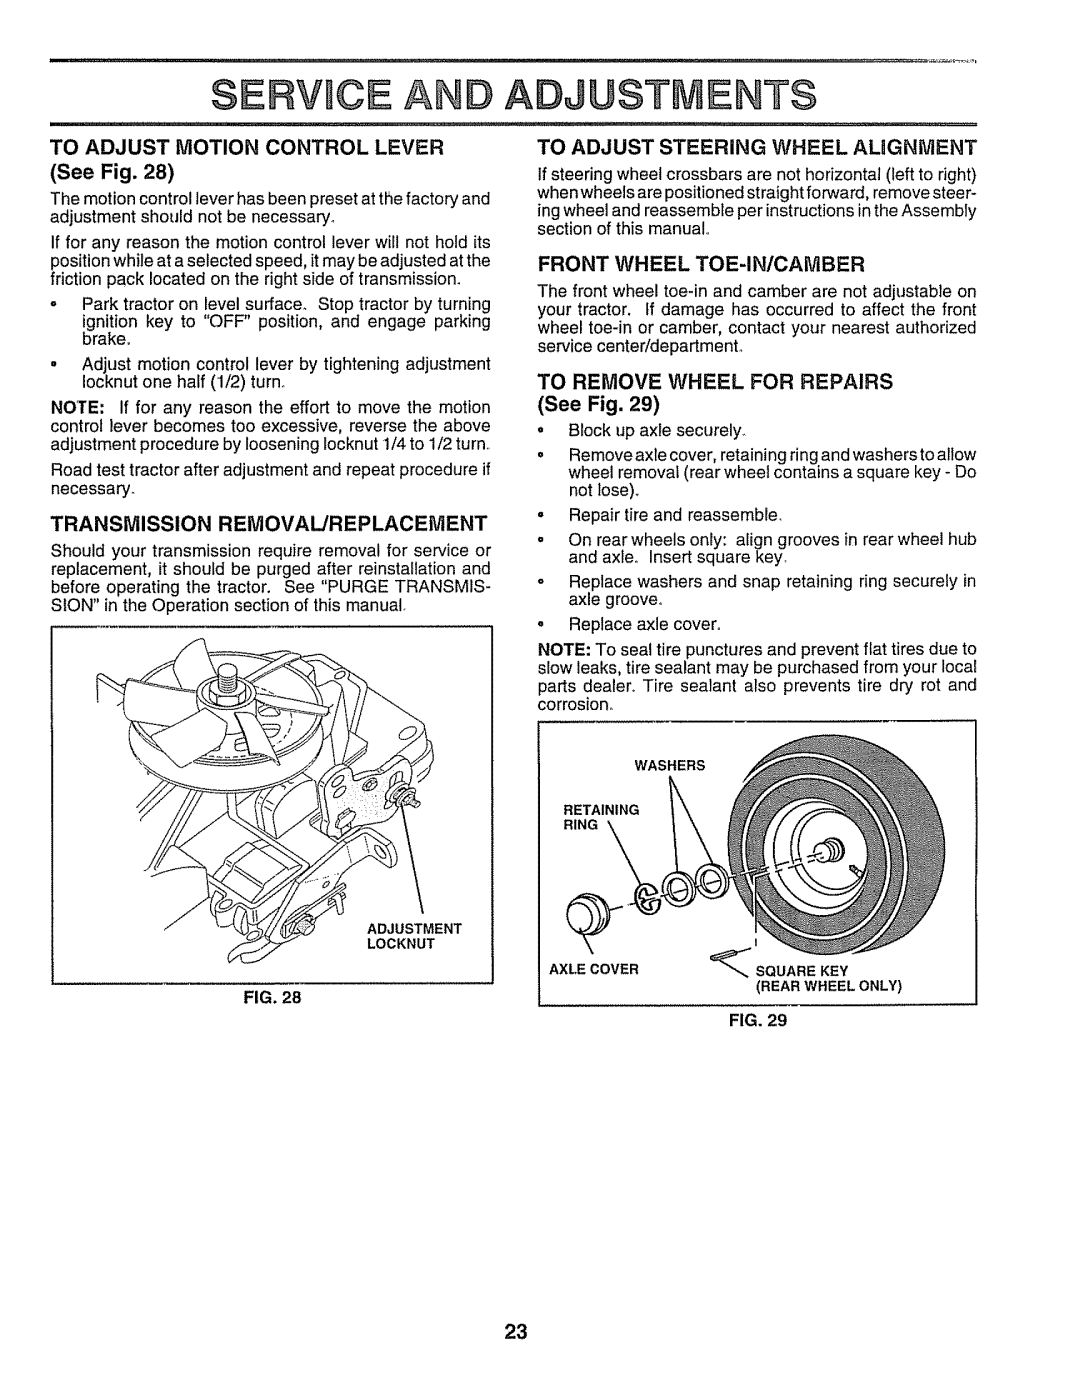 Craftsman 917.259172 Servbce An Adjustments, To Adjust Motion Control Lever, Transmission Removal/Replacement, See Fig 